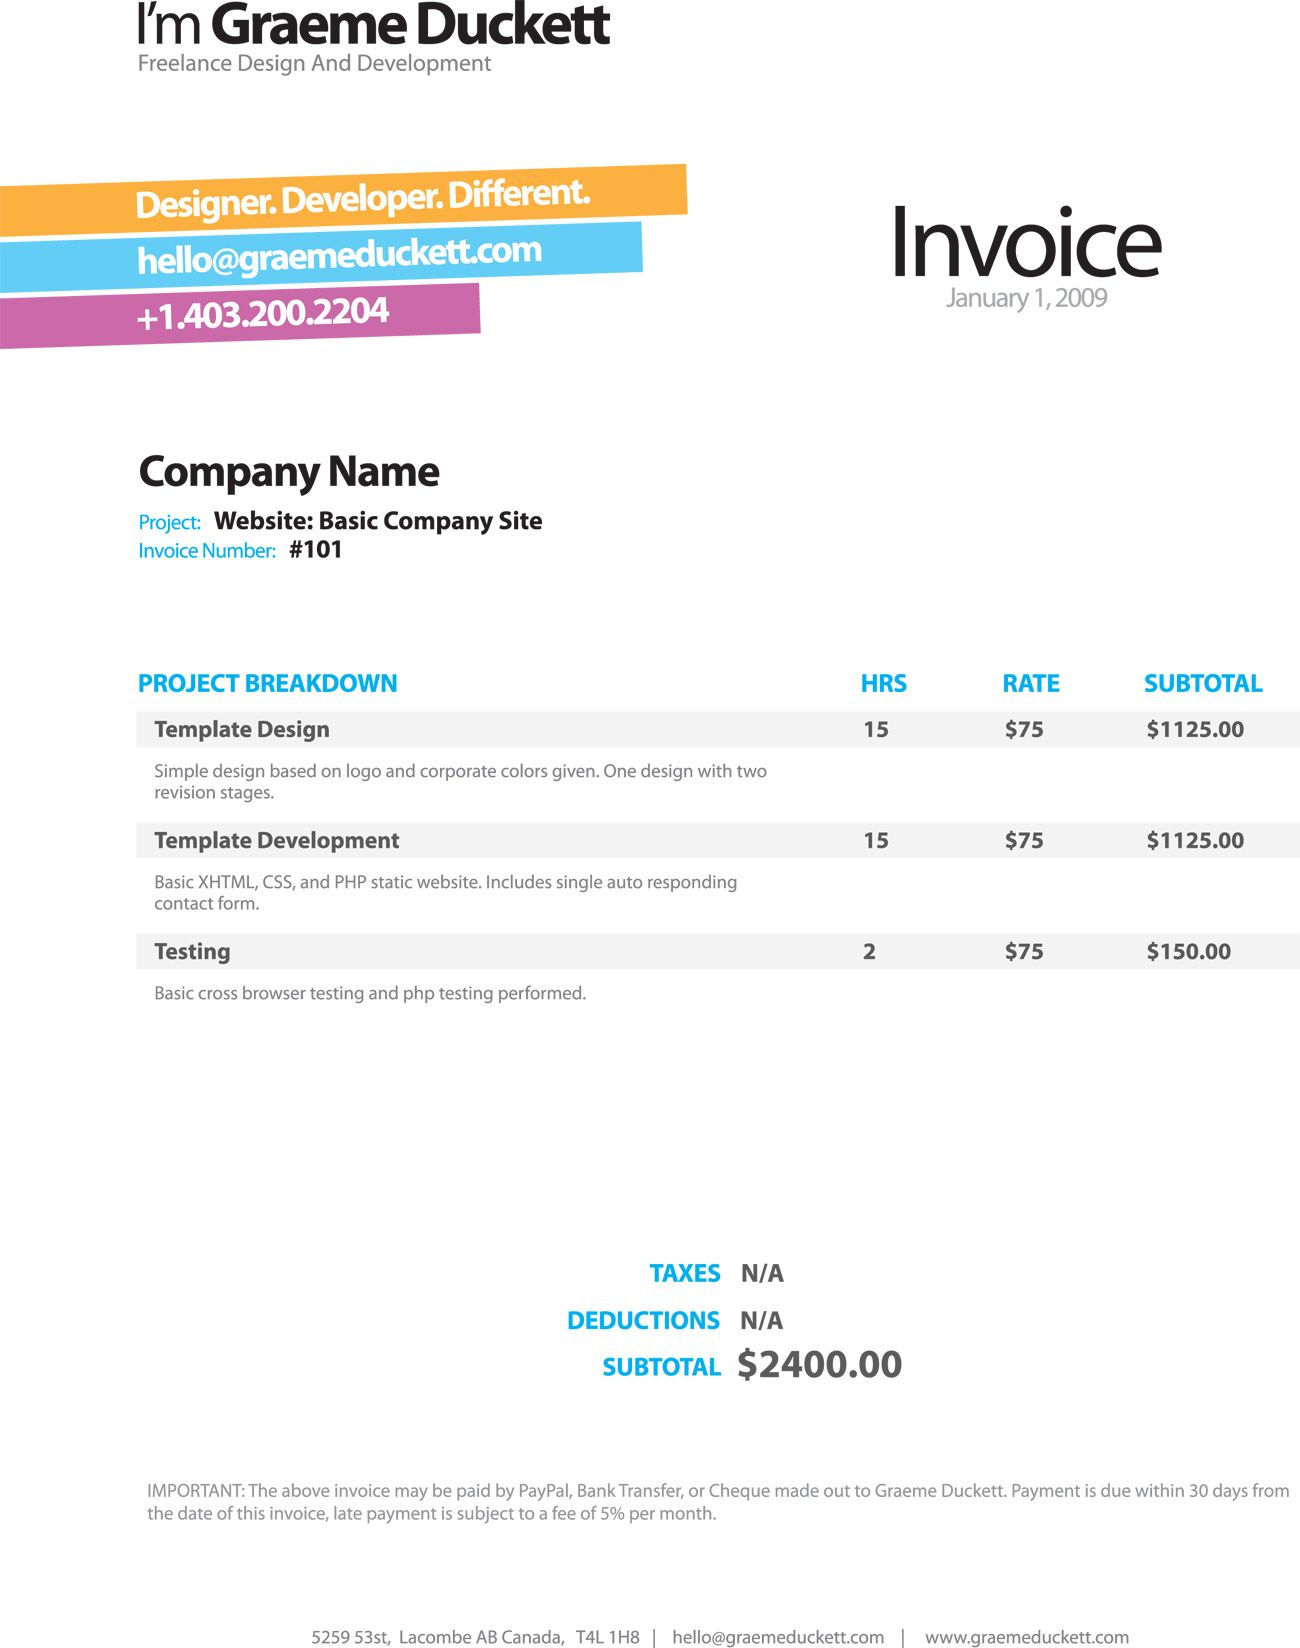 Invoice Like A Pro: Design Examples And Best Practices with regard to Web Design Invoice Template Word